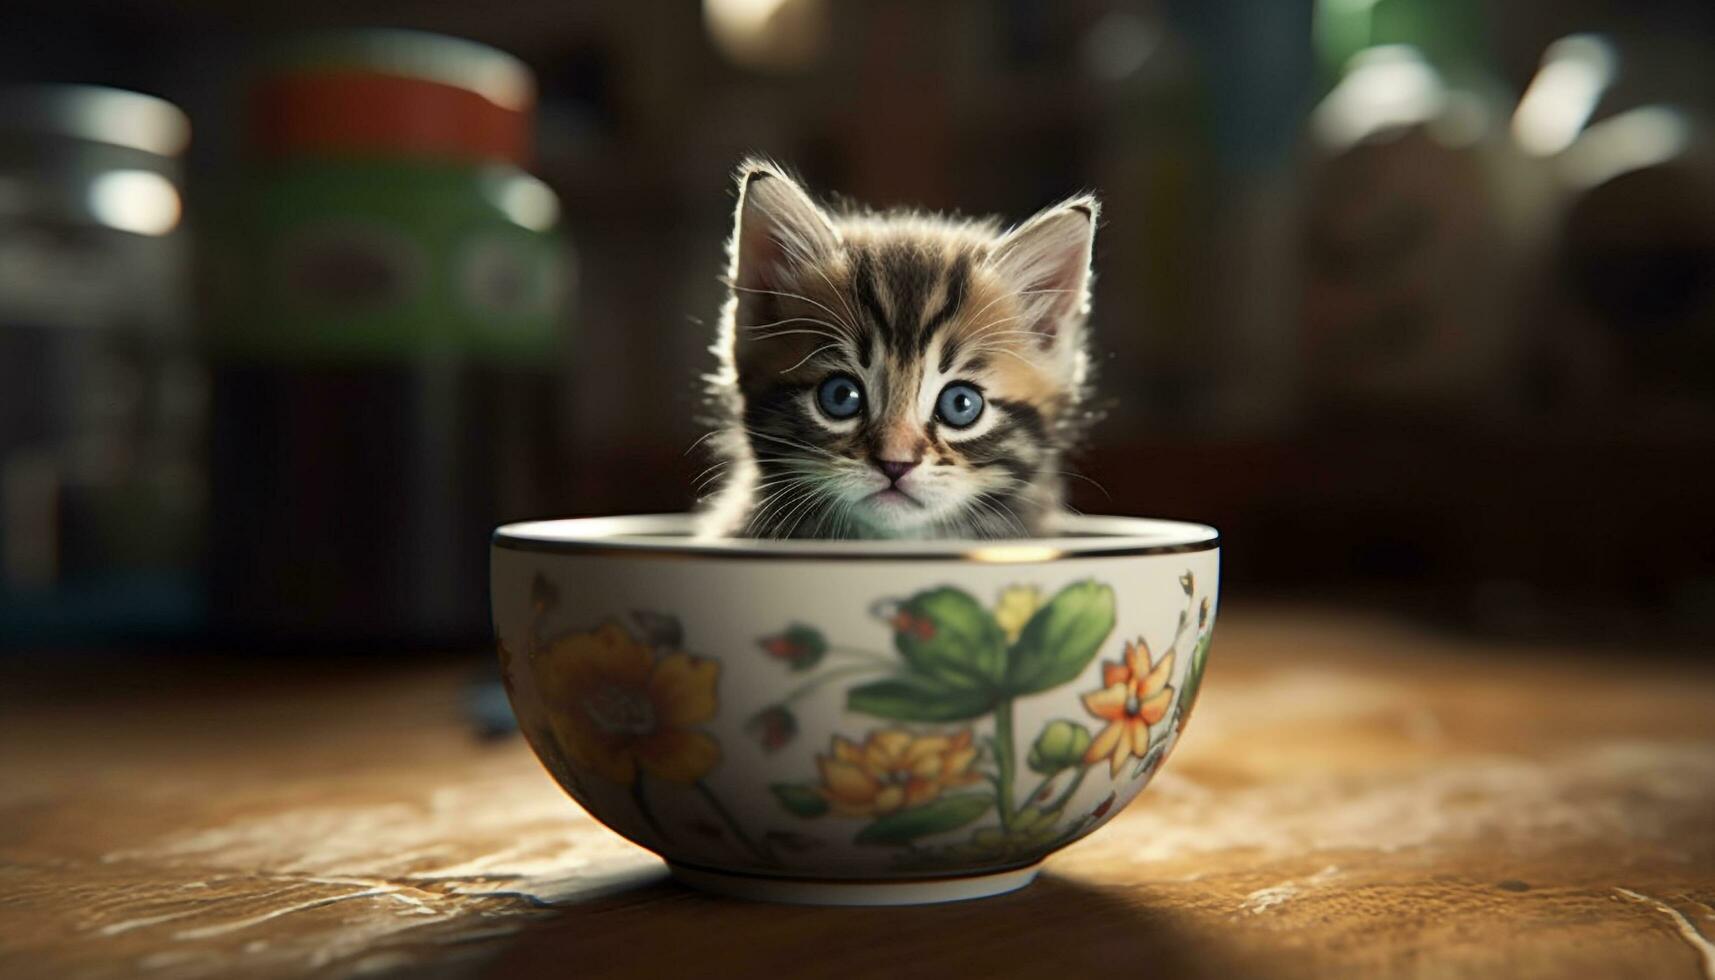 Cute kitten sitting on table, staring at camera with curiosity generated by AI photo